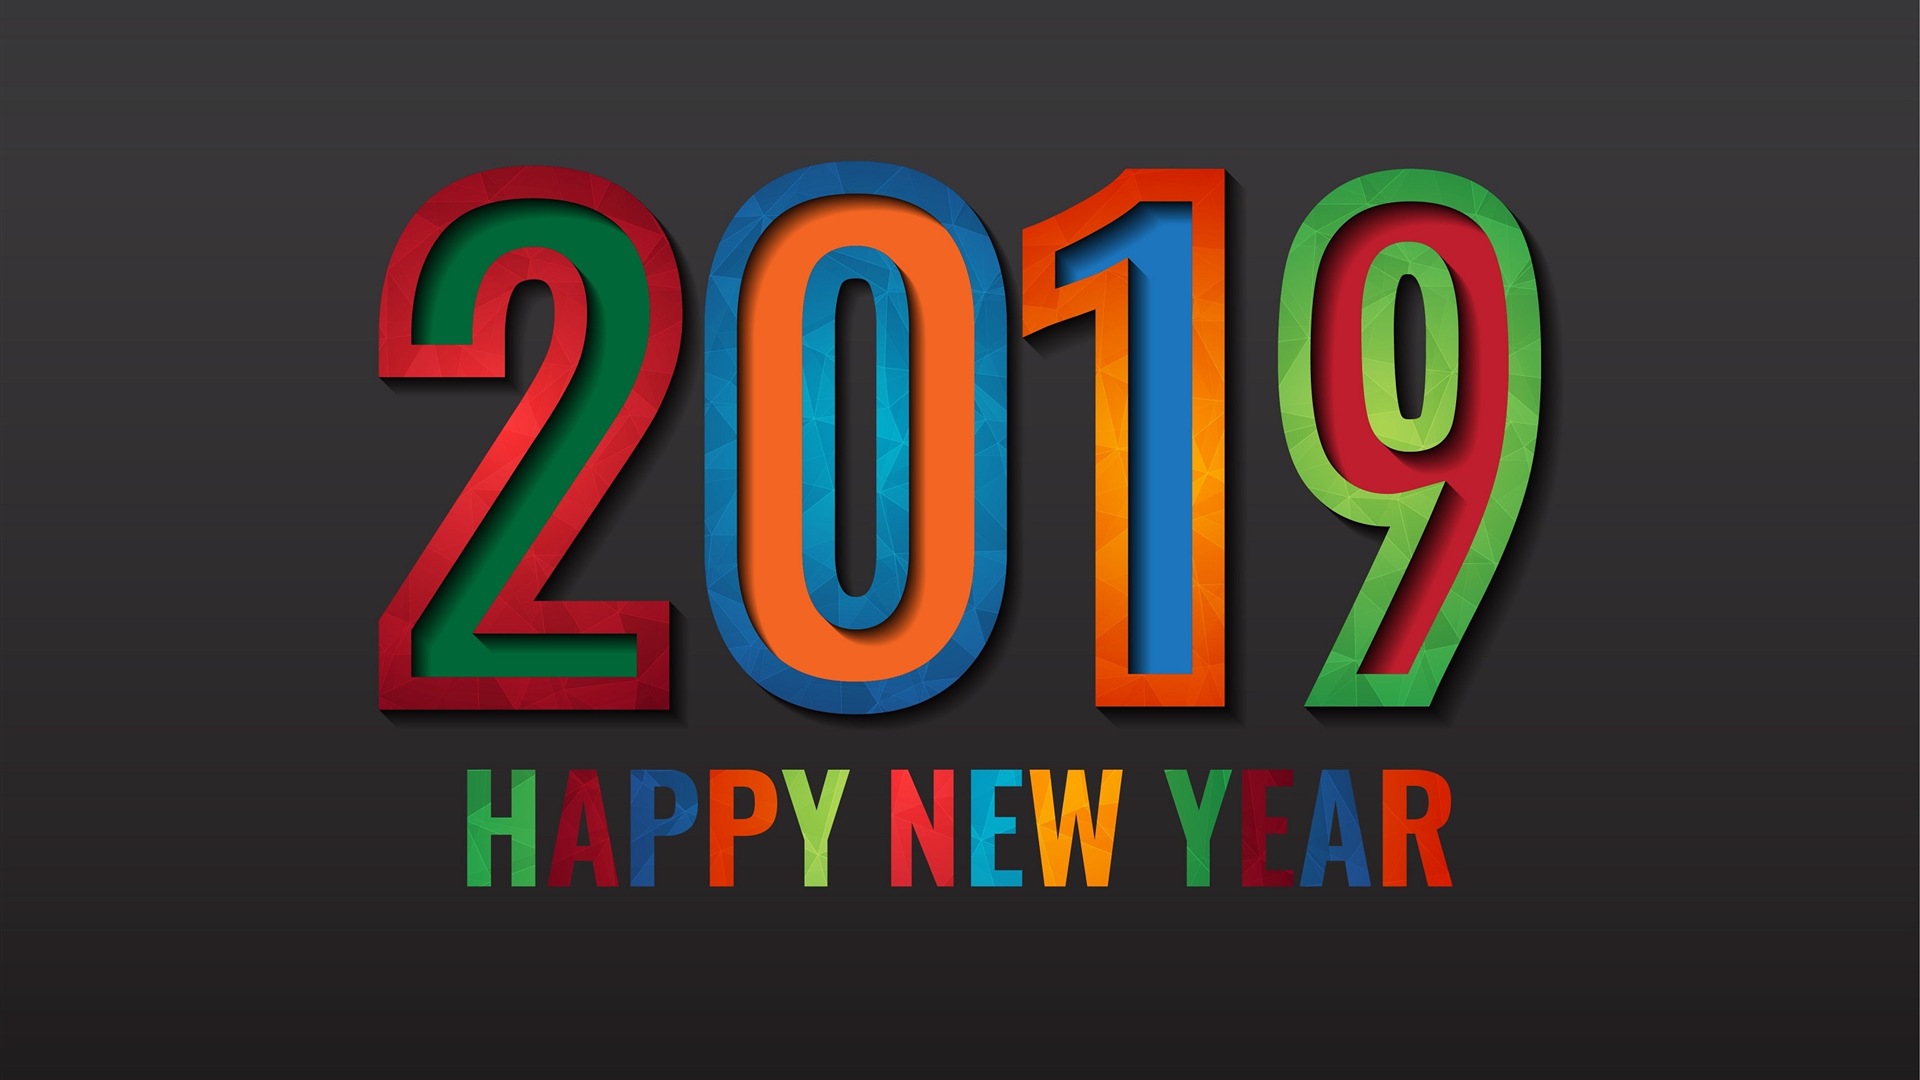 Happy New Year 2019 HD wallpapers #6 - 1920x1080